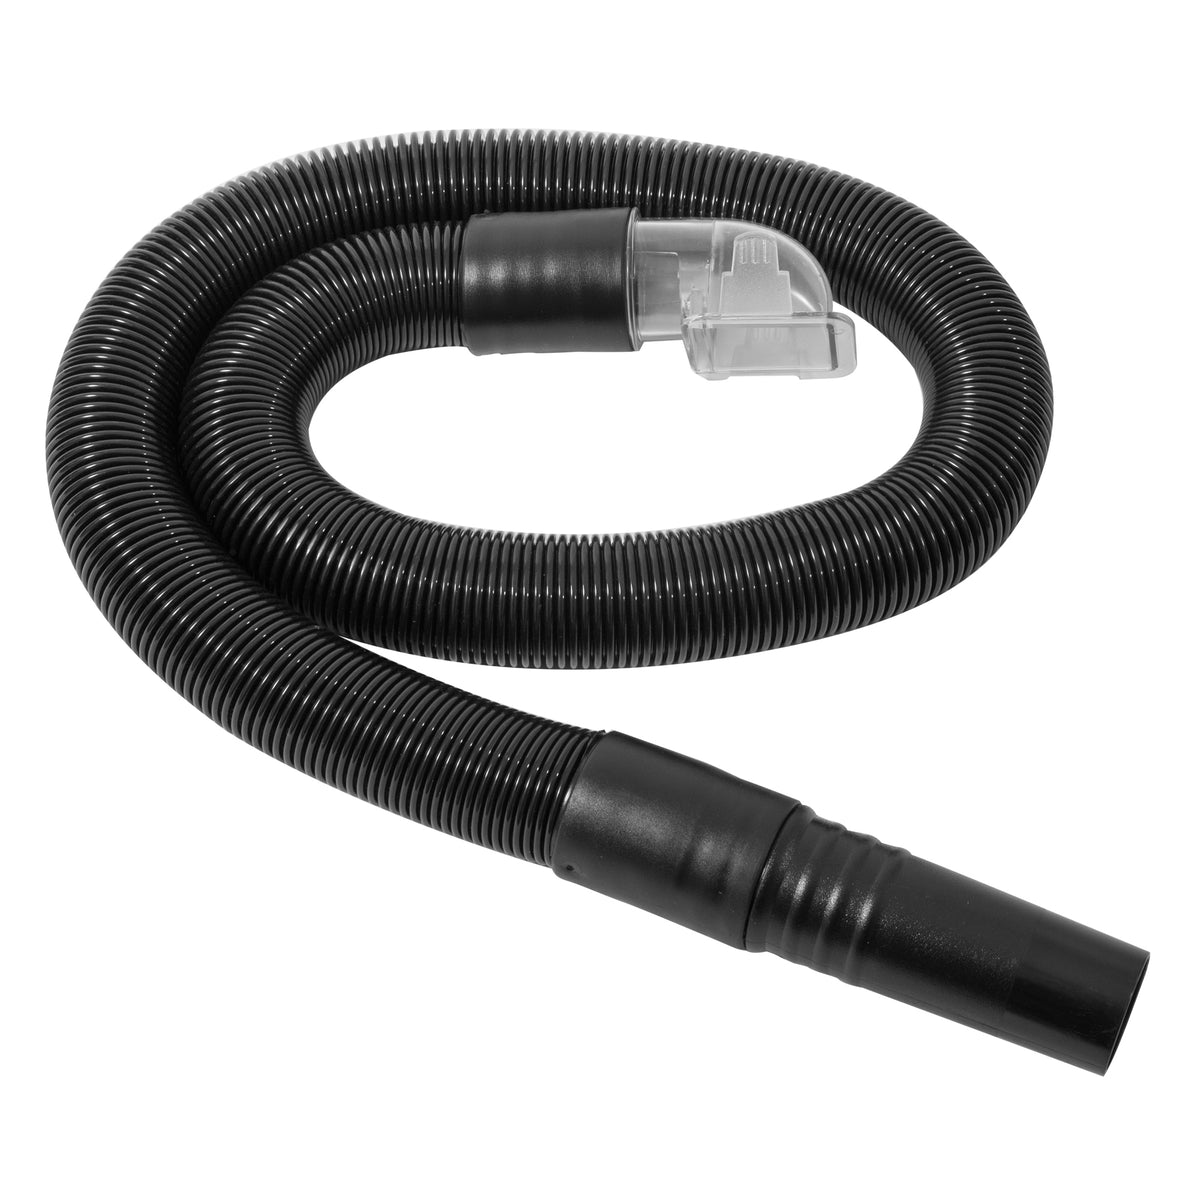 Stretch Hose Assembly 618654 Commercial Sanitaire –